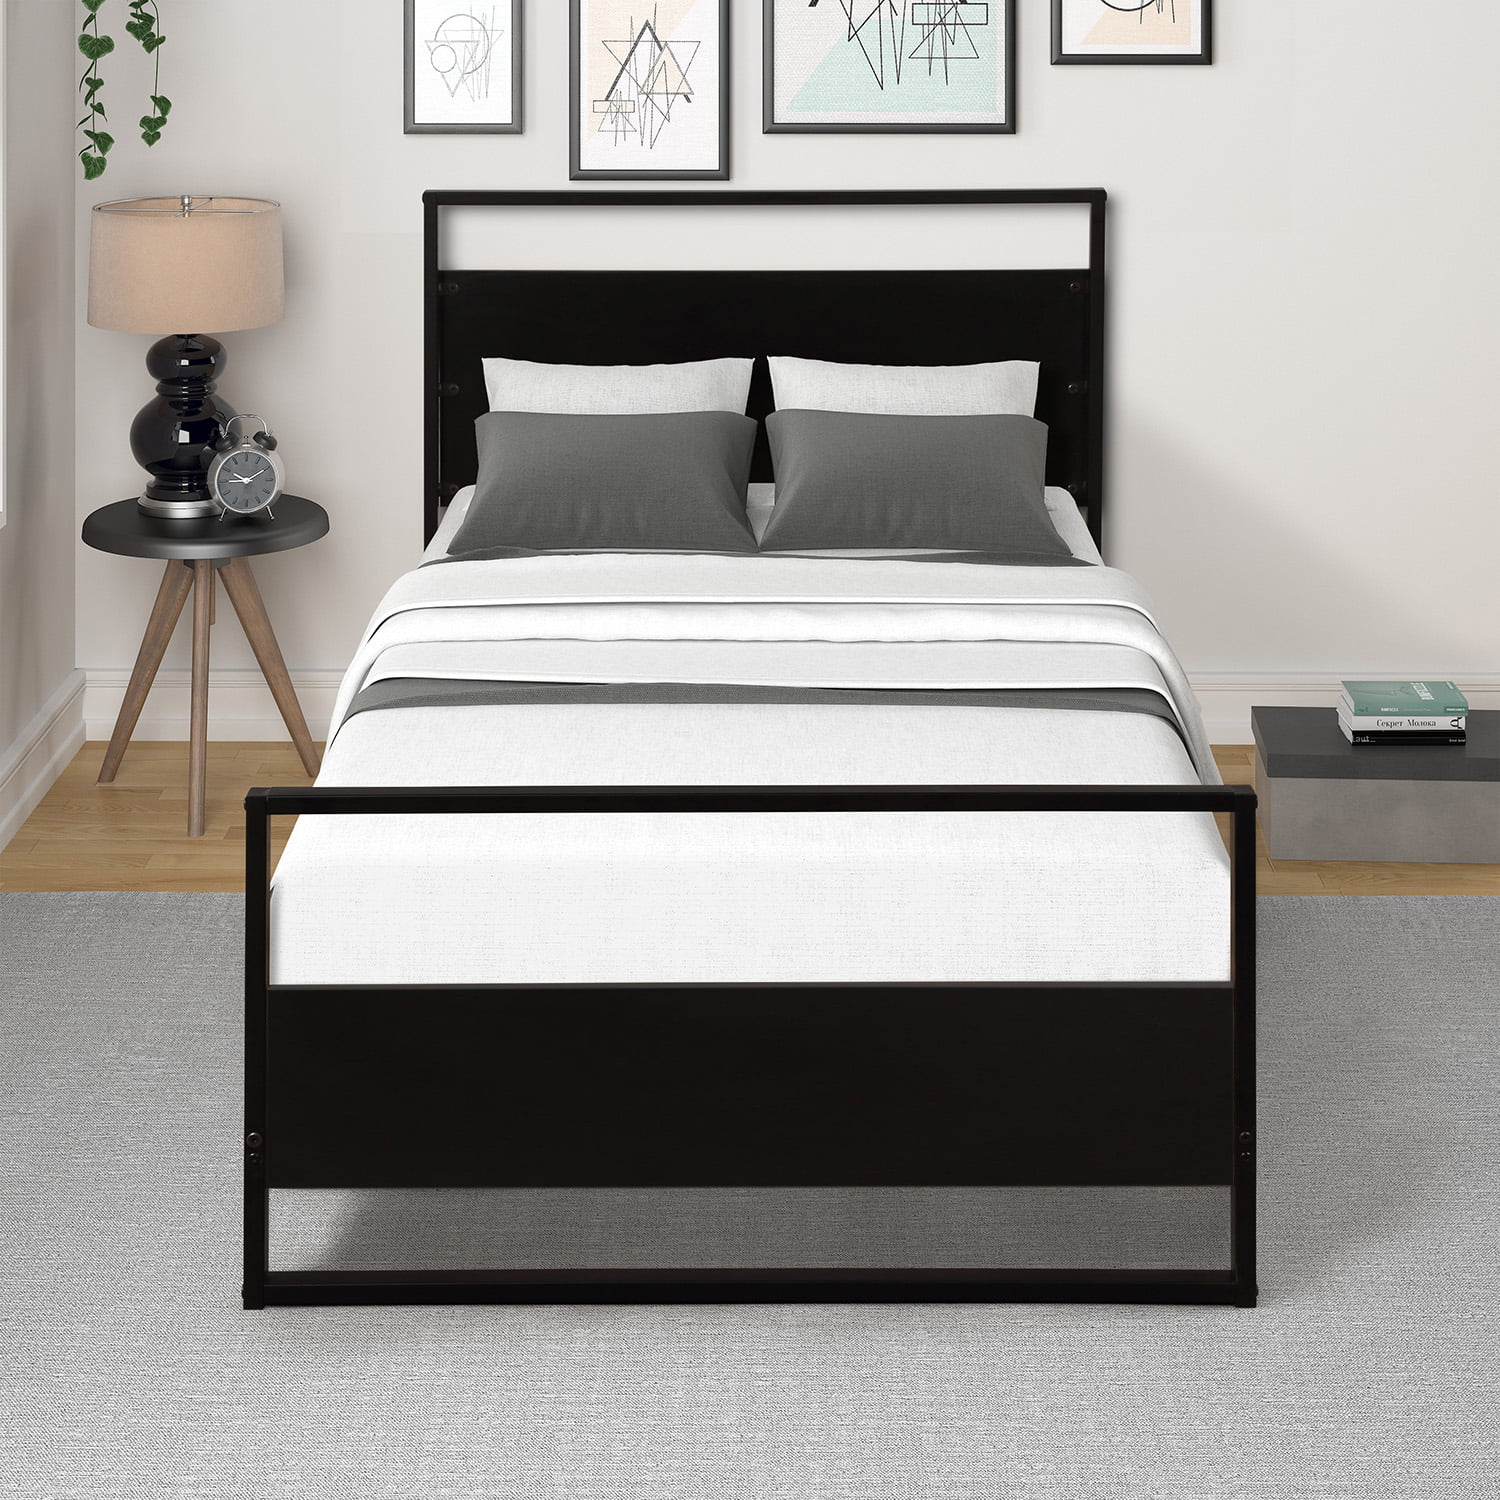 Twin Metal Bed Frame Black, Twin Bed Frame Without Box Spring